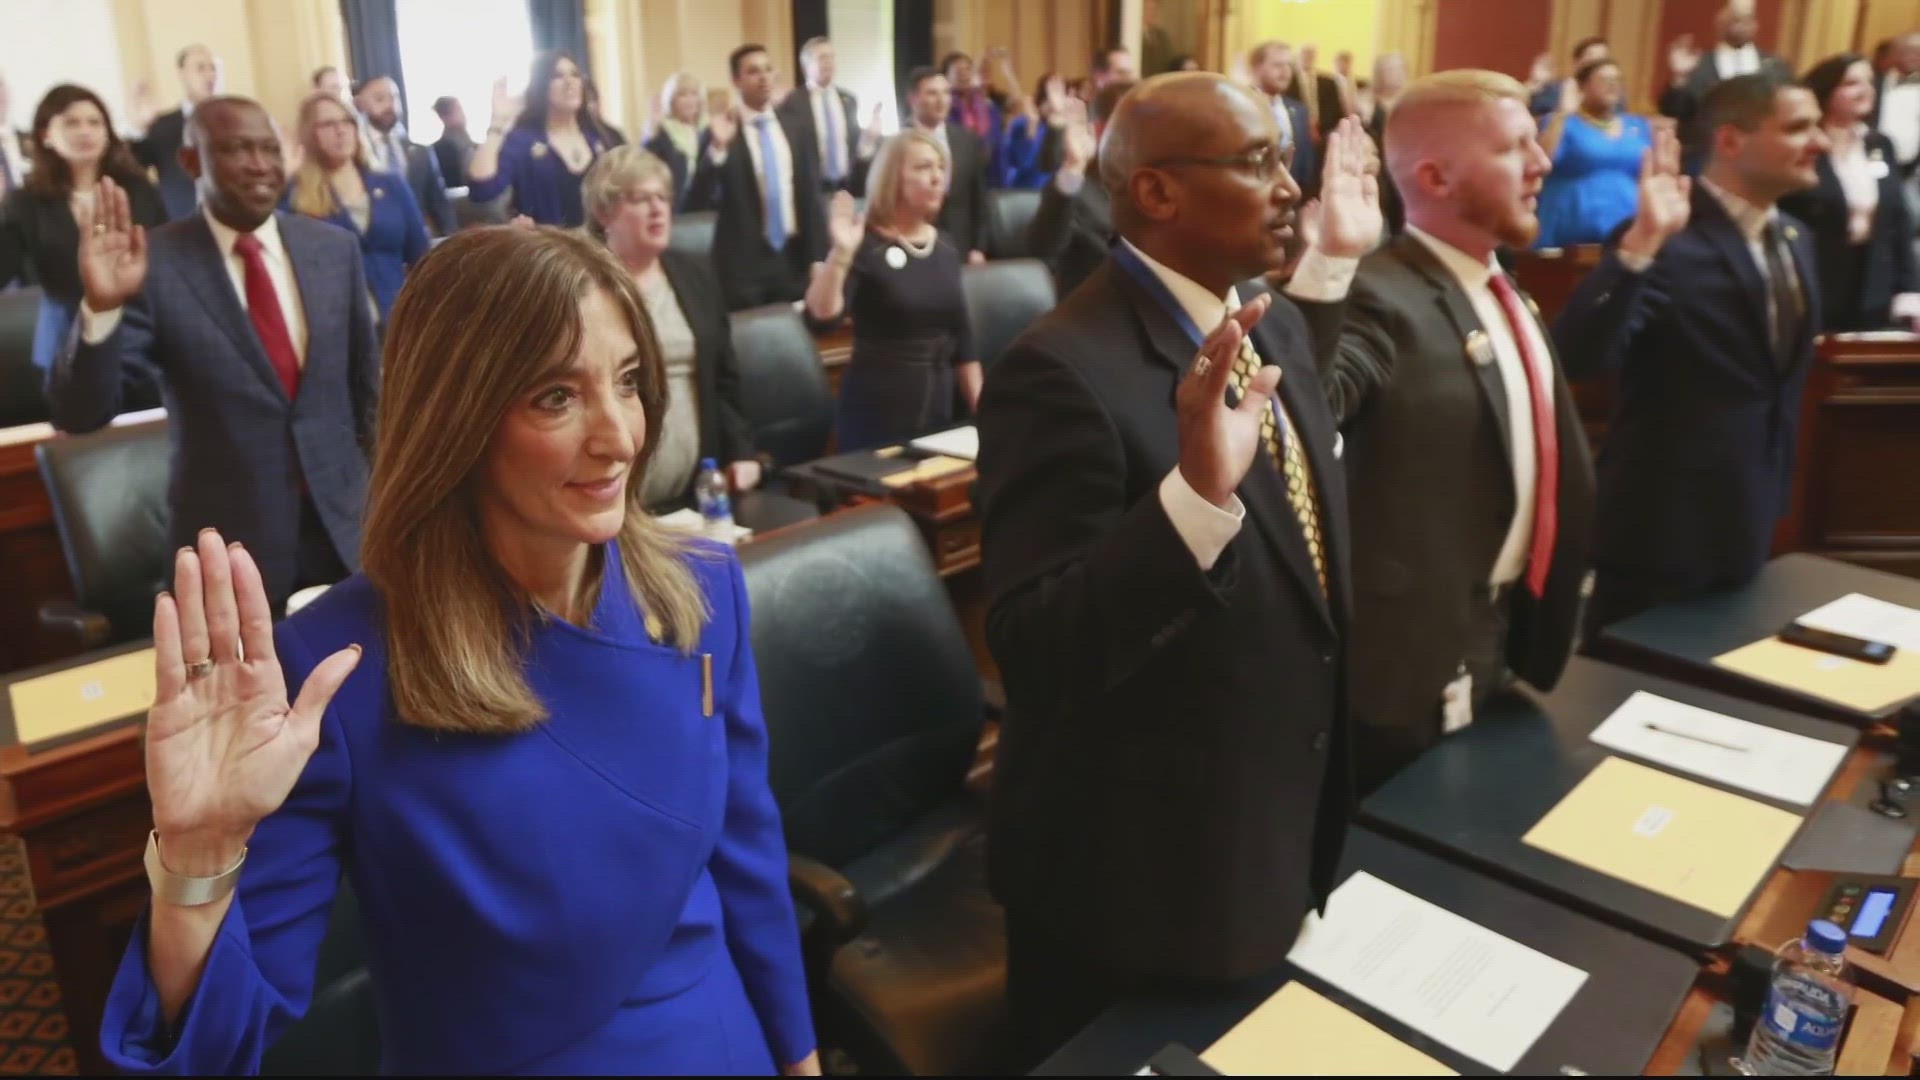 Eileen Filler-Corn was the first woman and first Jewish House Speaker in Virginia. She told WUSA9 she will not seek re-election for the House.